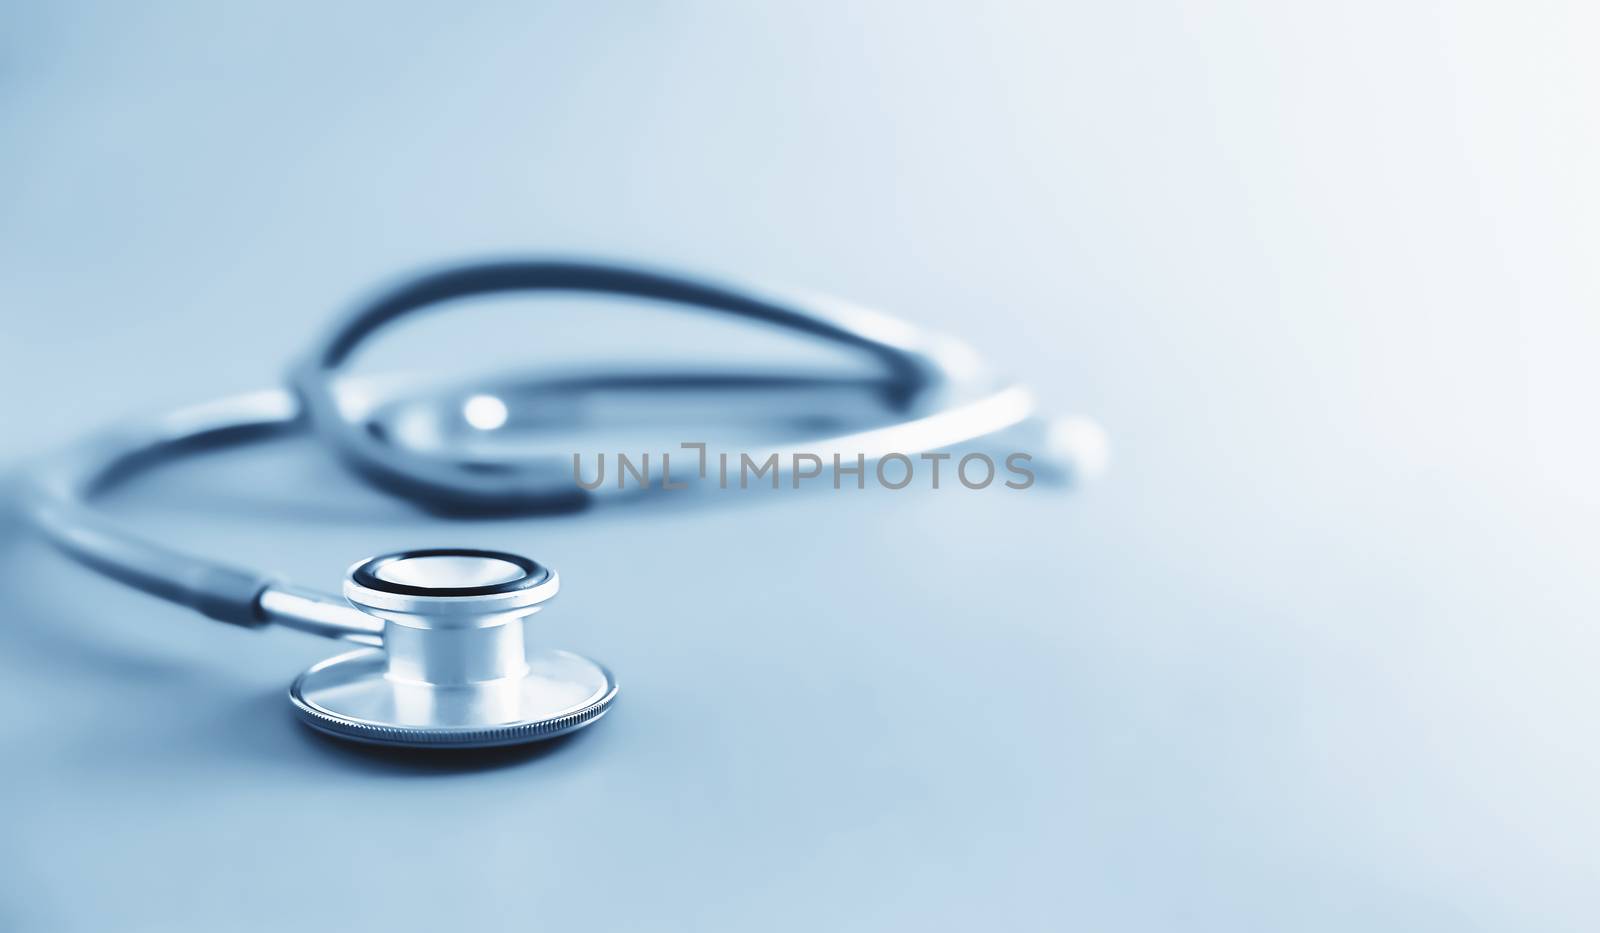 stethoscope blue tone background with copyspace